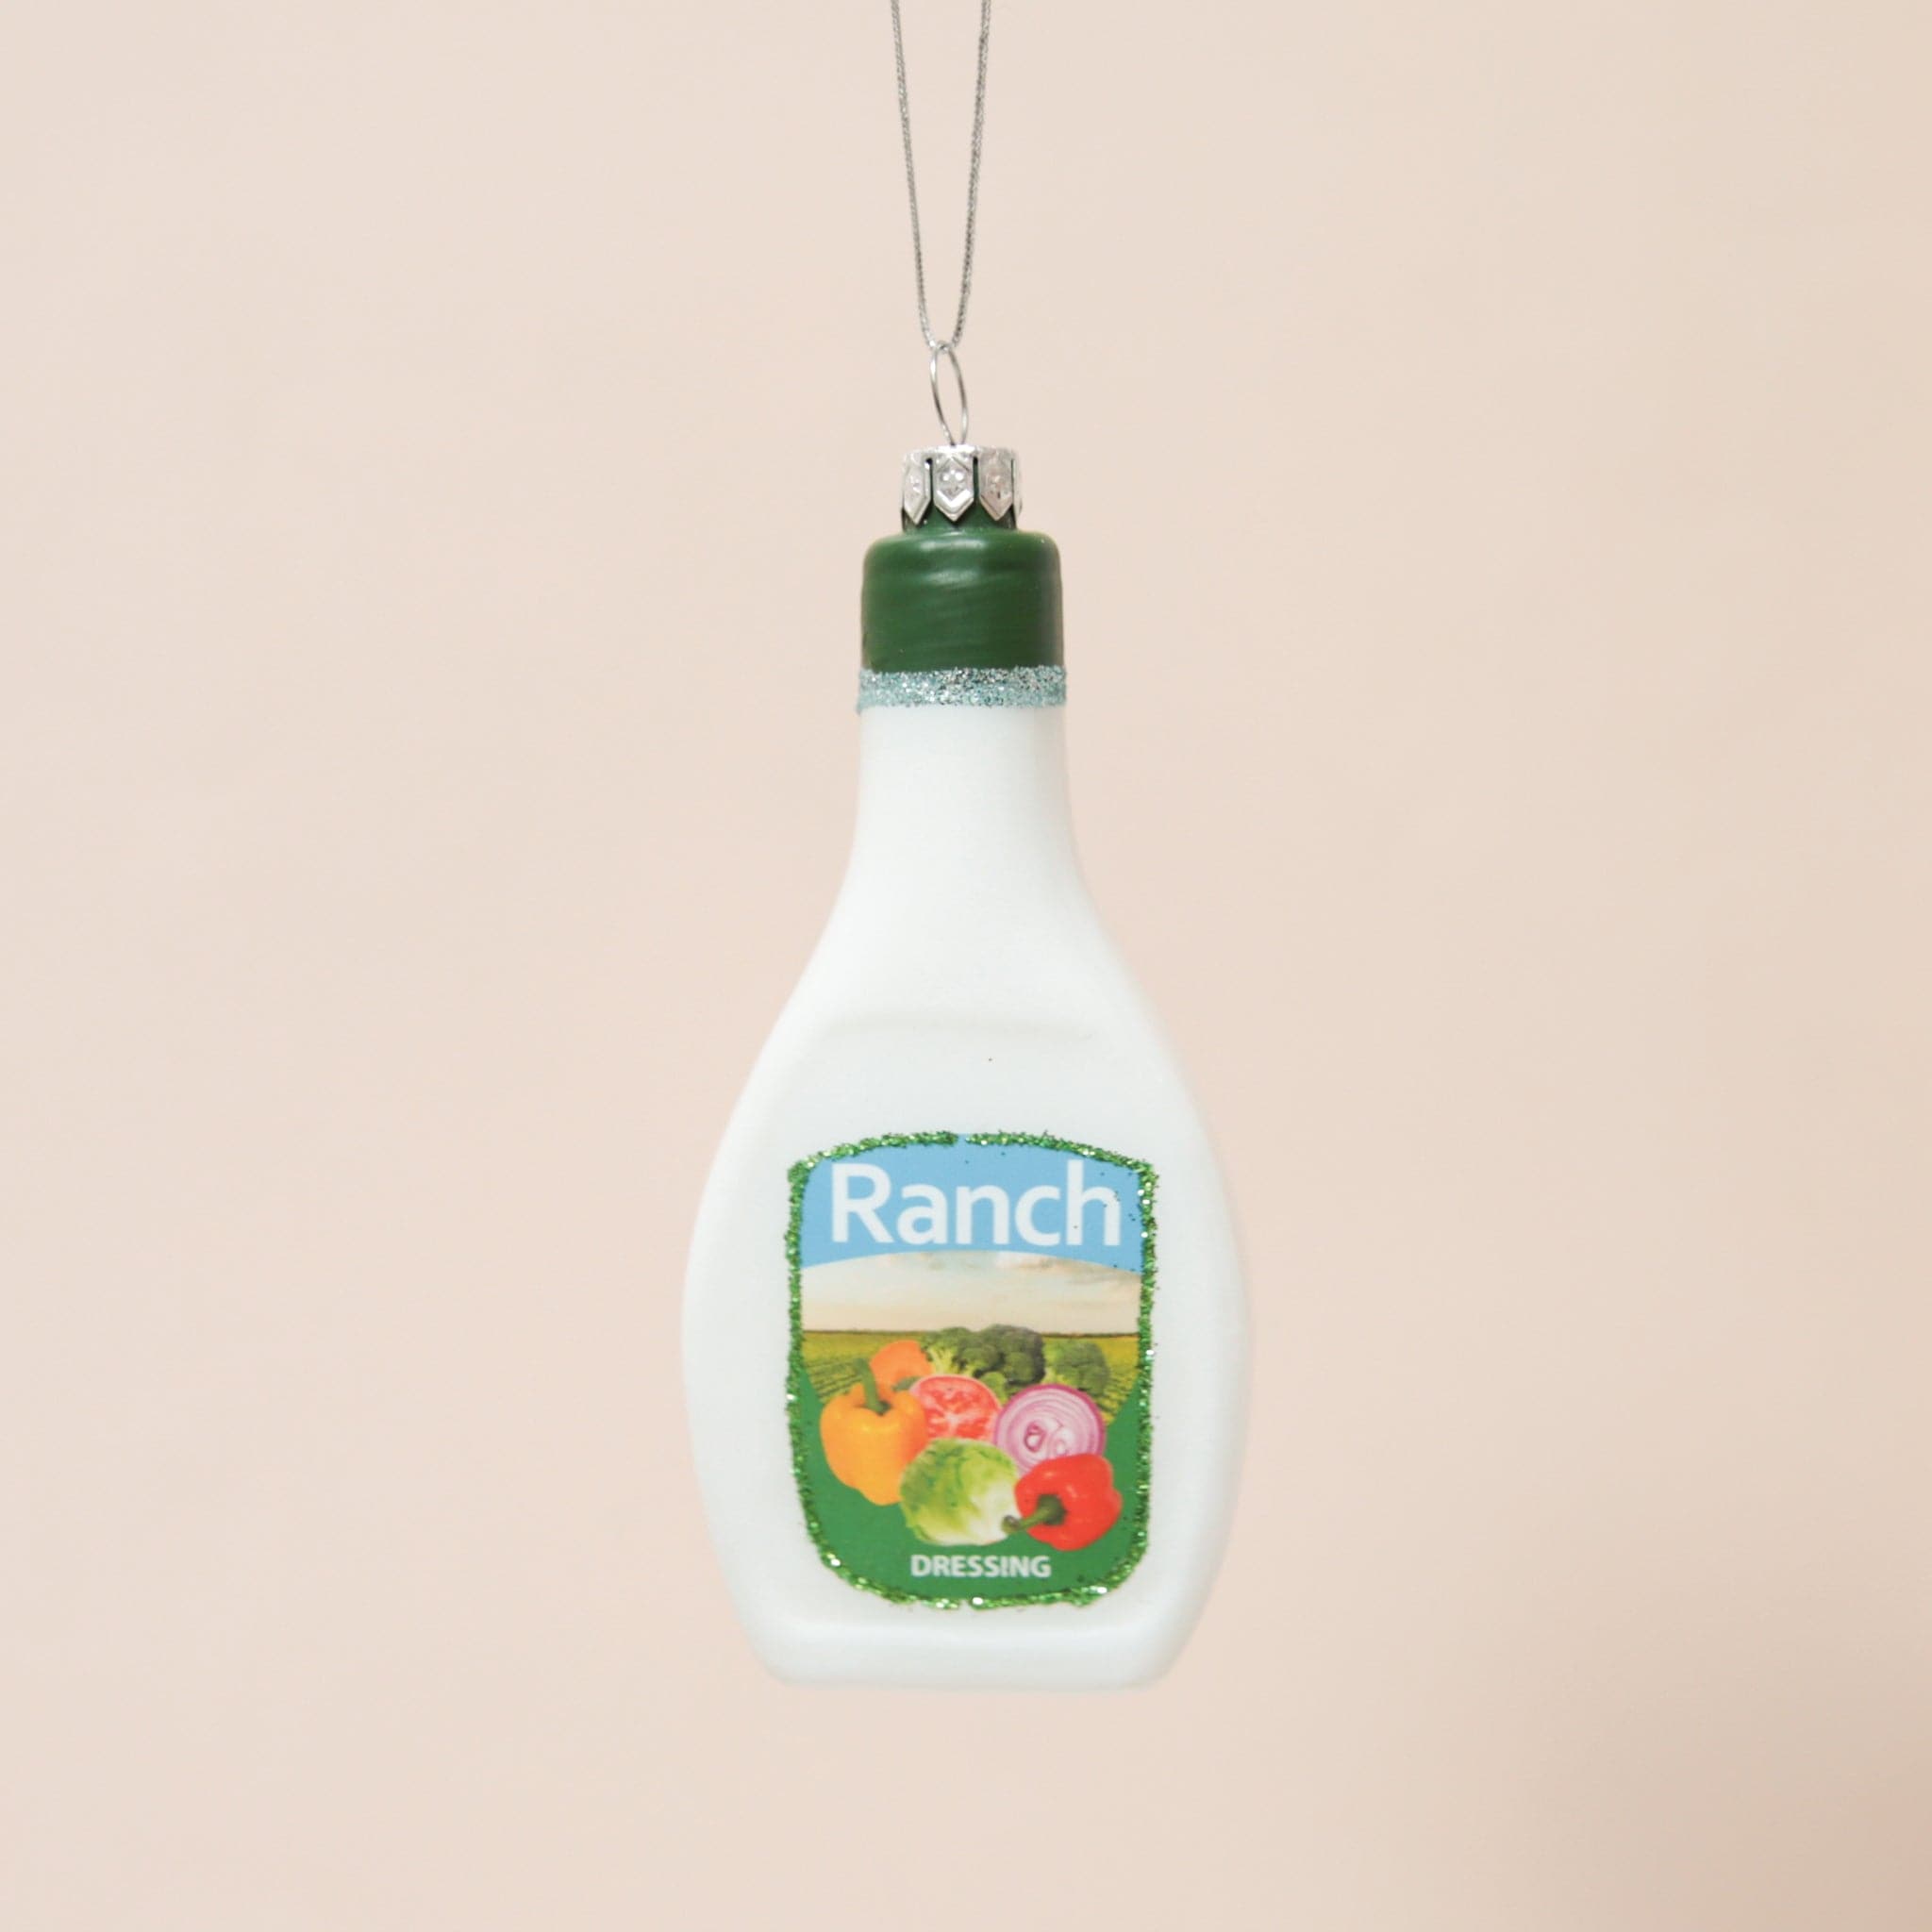 A glass bottle or ranch ornament with a 3.5" loop for hanging and glitter detailing.